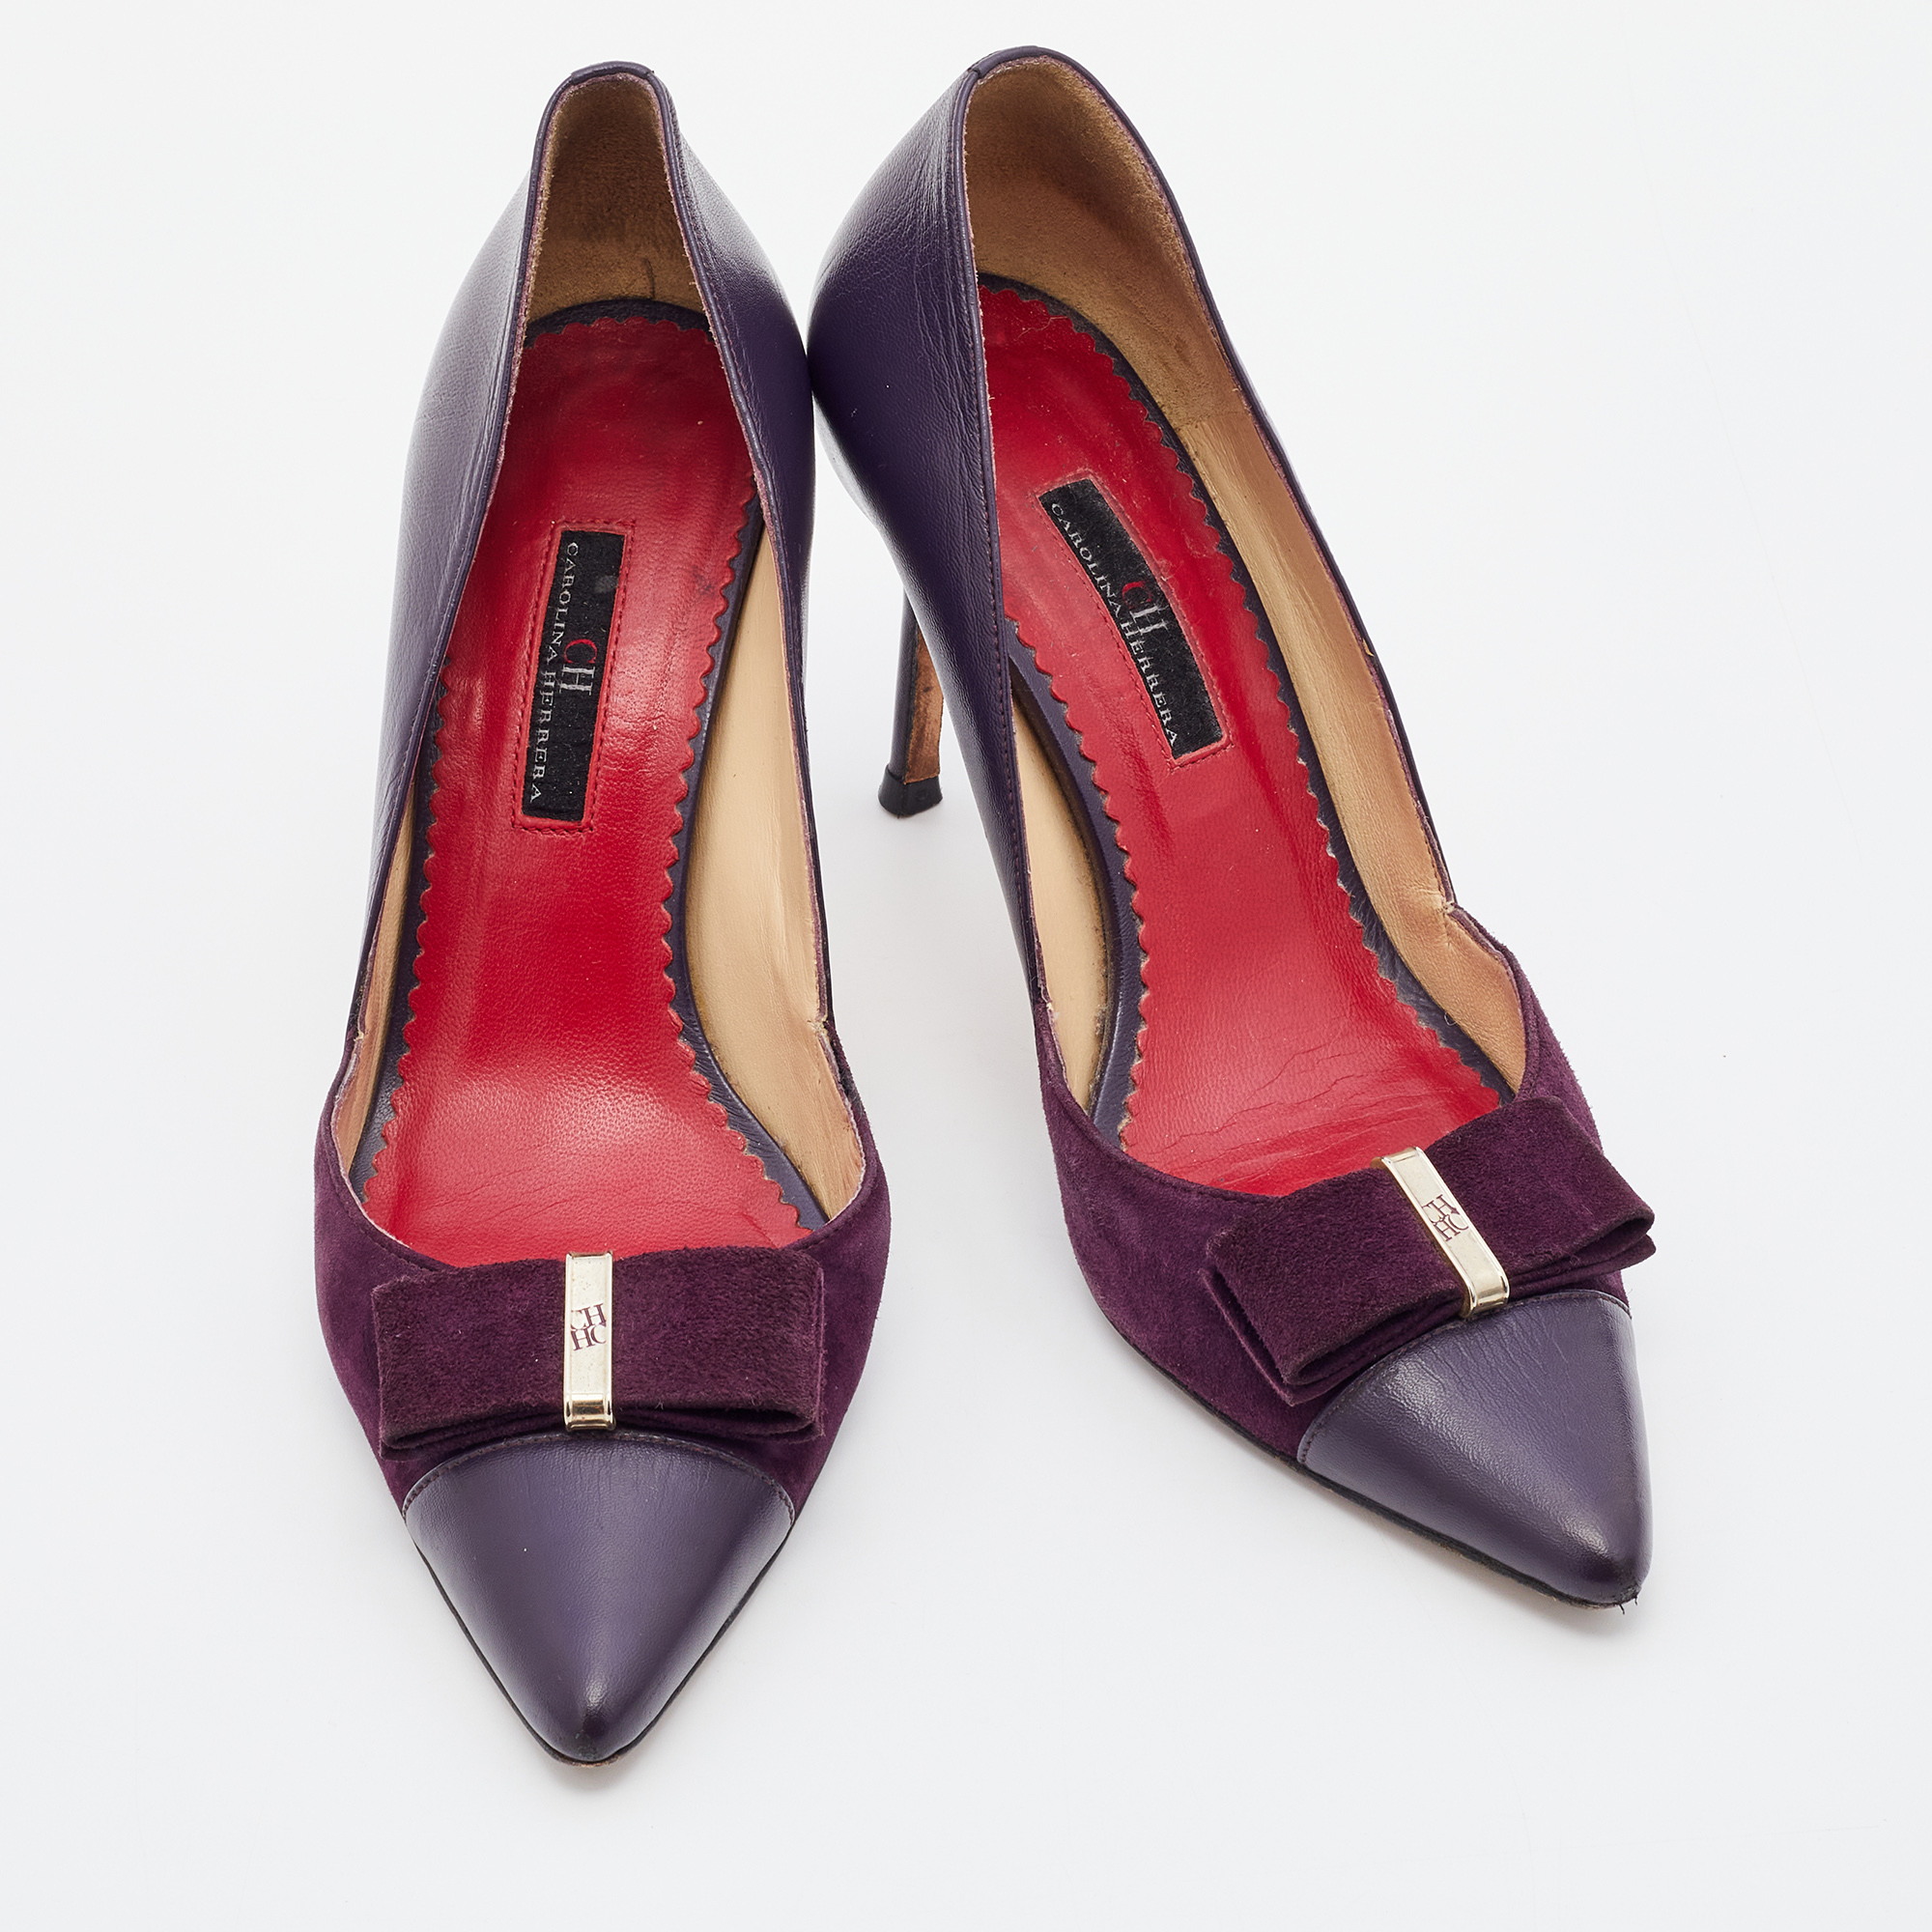 CH Carolina Herrera Purple Suede And Leather Pointed Cap Toe Pumps Size 37